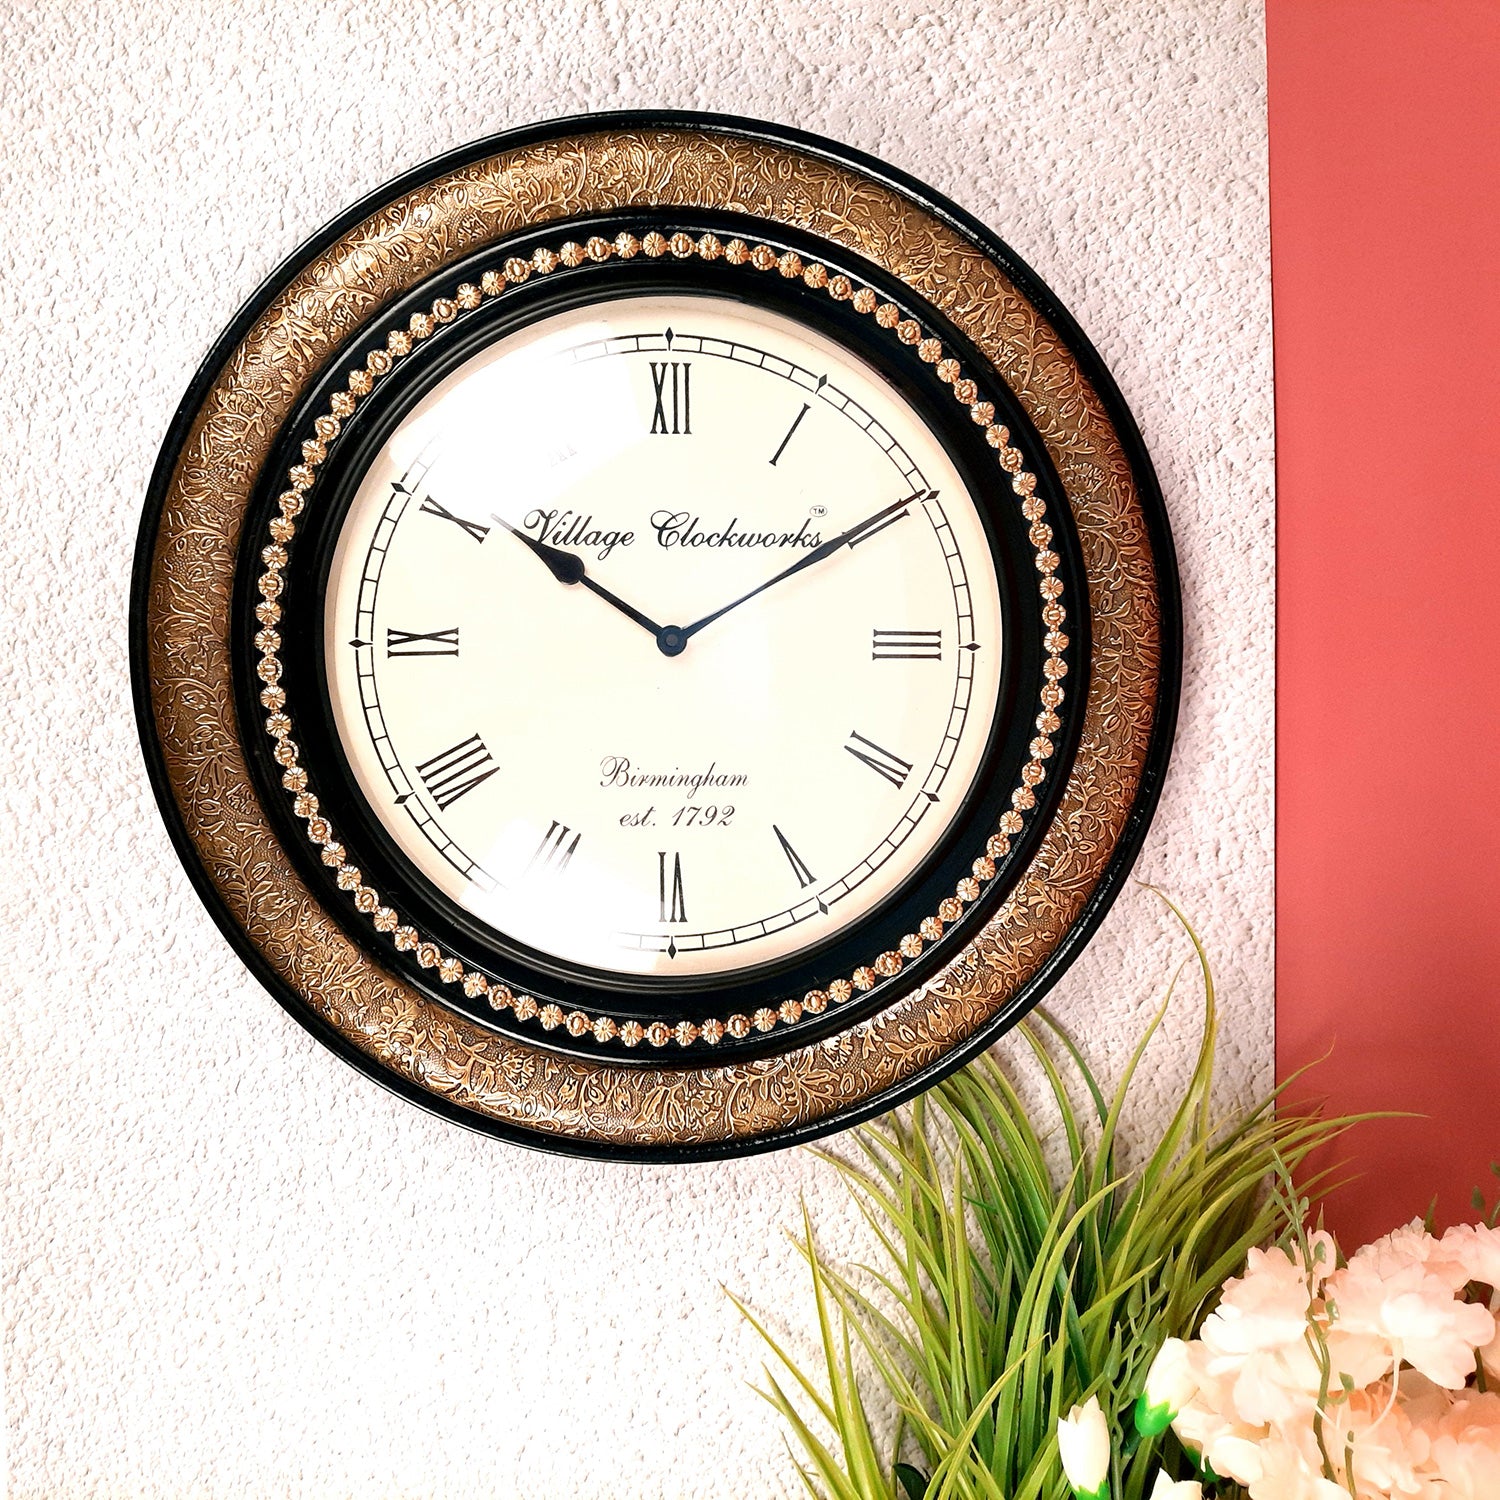 Wall Clock Vintage | Wall Mount Clock With Premium Finish & Brass Work - For Home, Office, Bedroom, Hall Decor & Gifts | Wedding & Housewarming Gift -18 inch - Apkamart